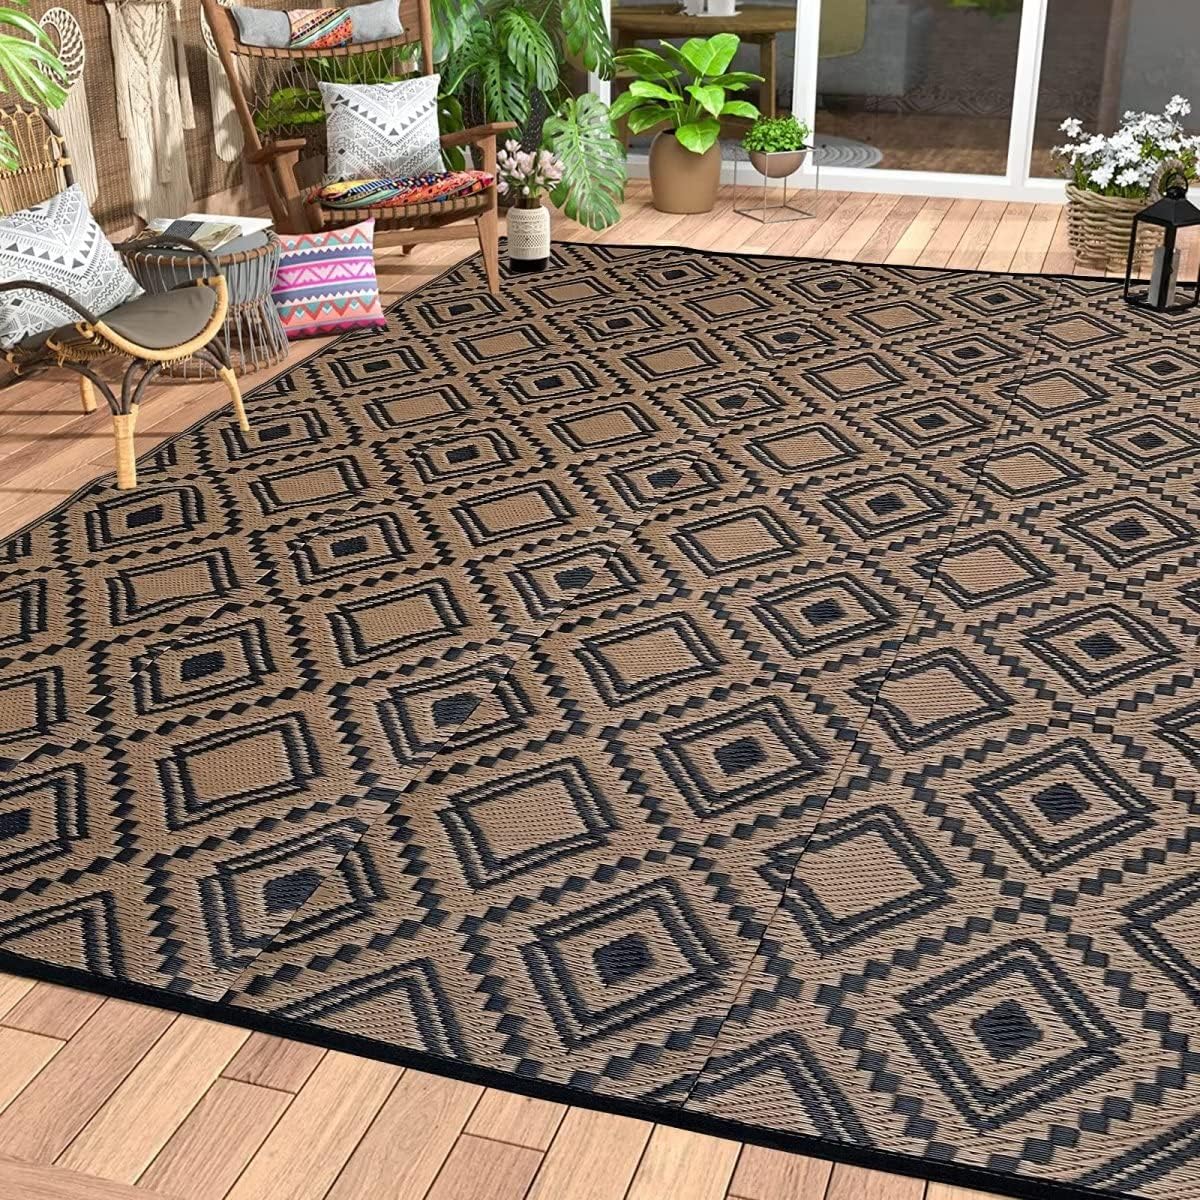 Outdoor Rugs for Patio Clearance - 5'x8' Waterproof [...]